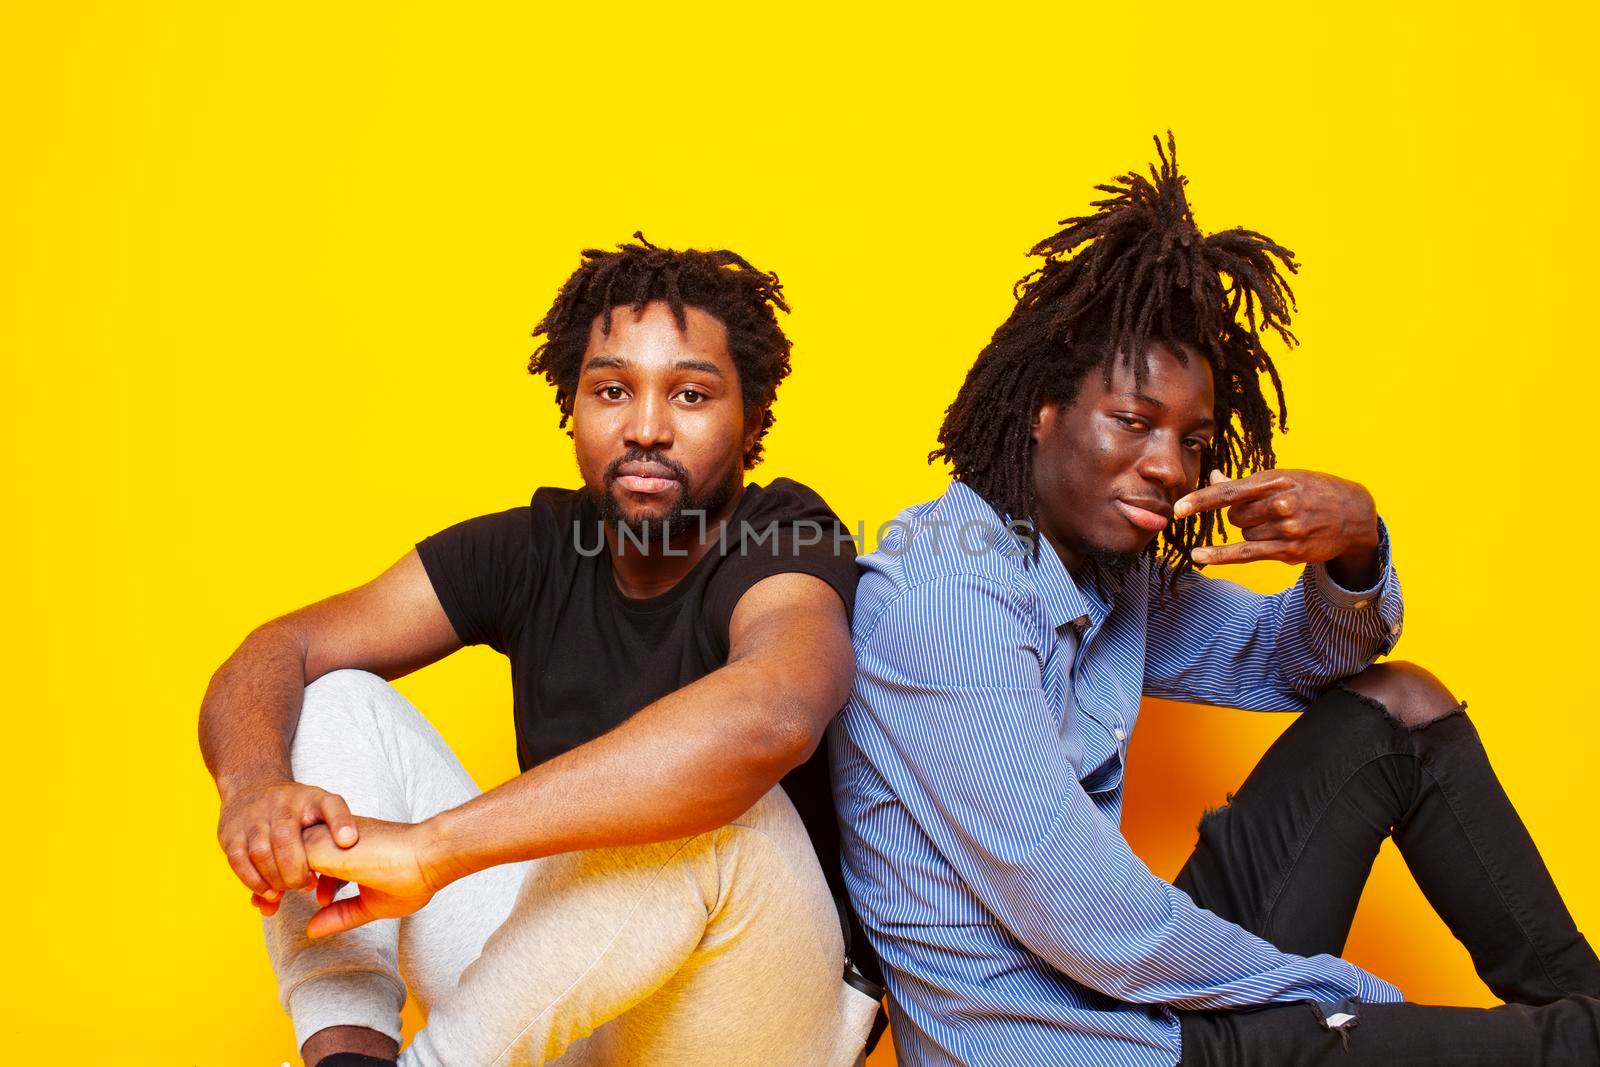 two african american guys posing cheerful together on yellow background, lifestyle people concept close up